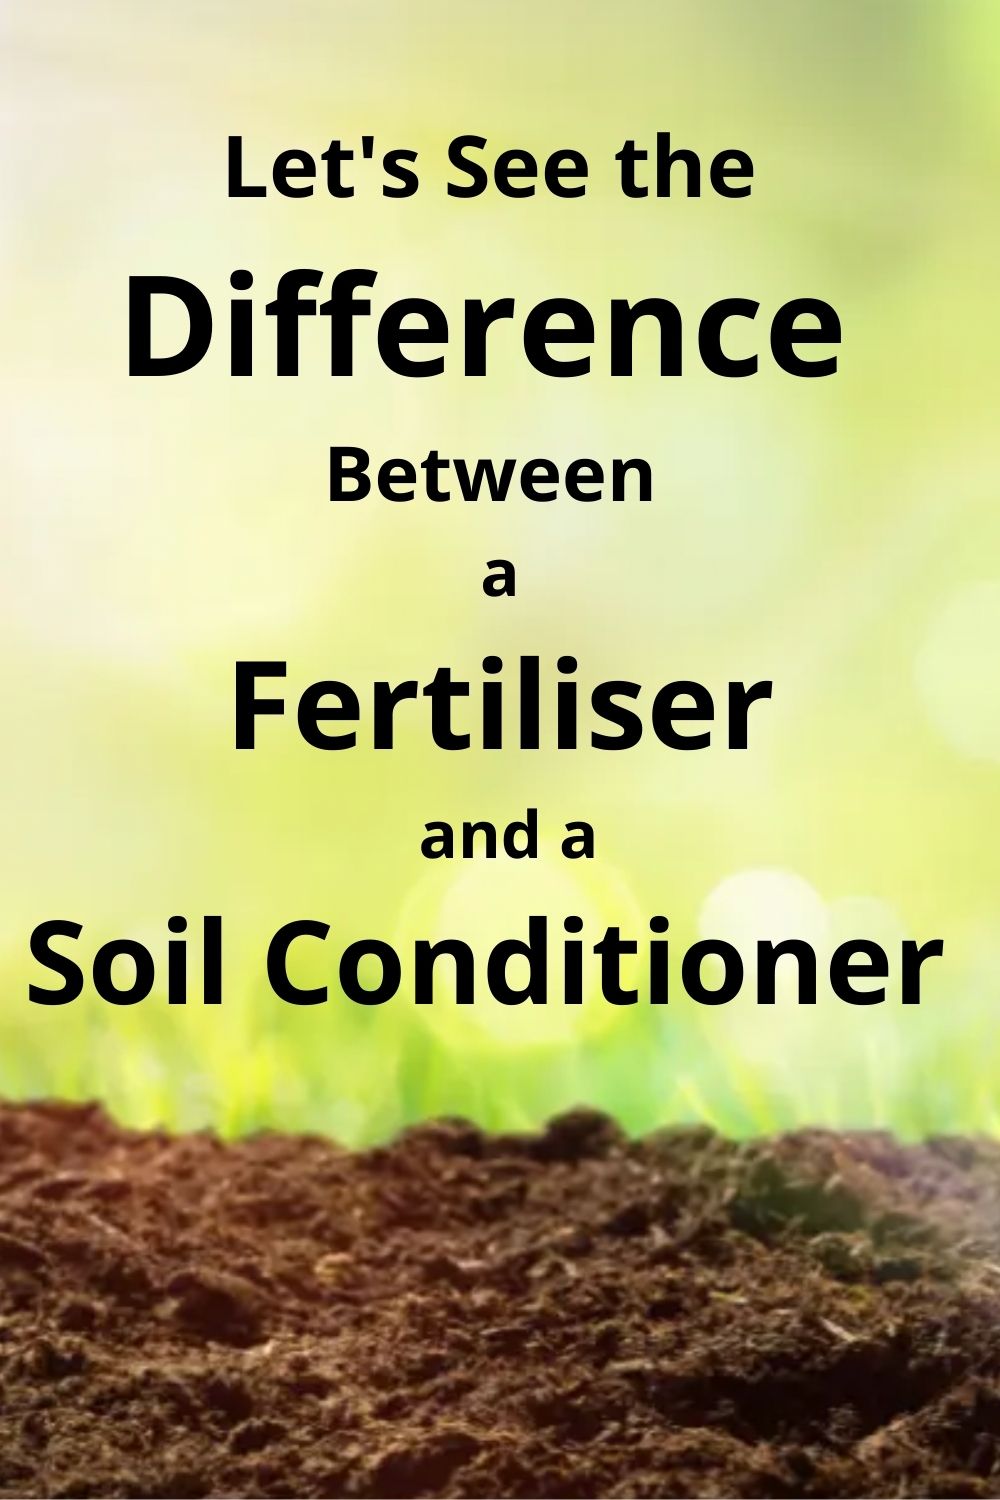 All about the difference between fertiliser and soil conditioner